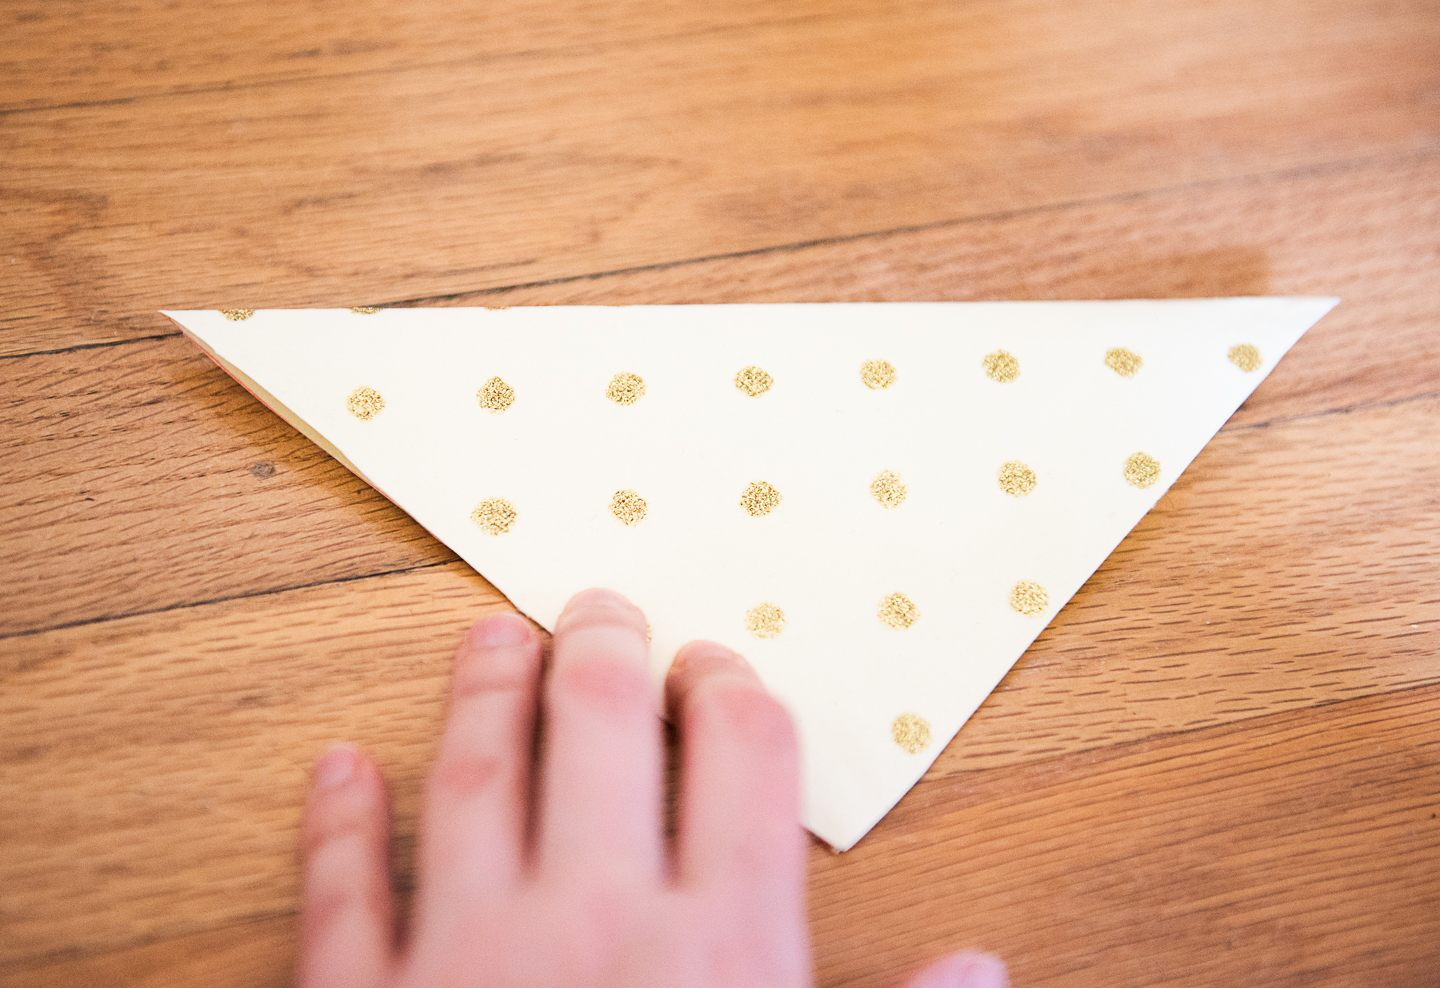 DIY Paper Banner from Upcycled Wrapping Paper